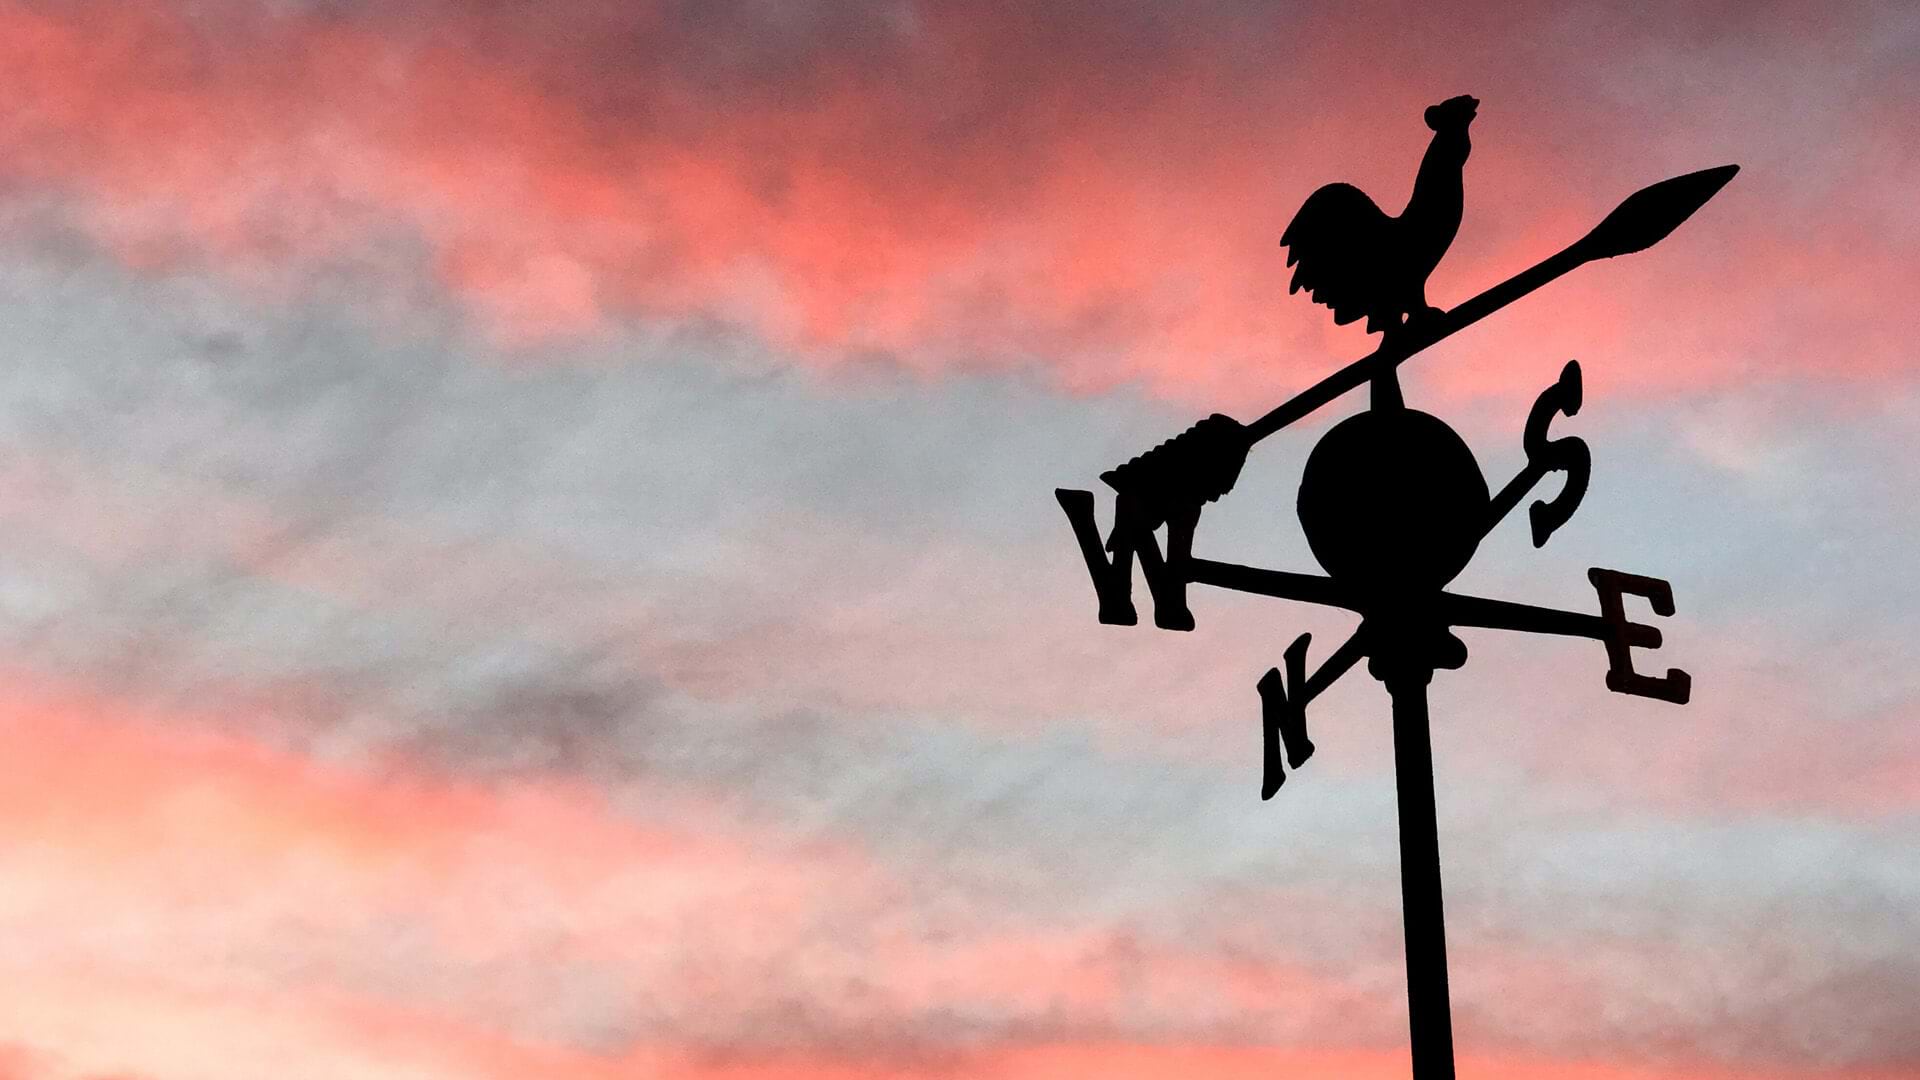 A weathervane represents movements of the population center